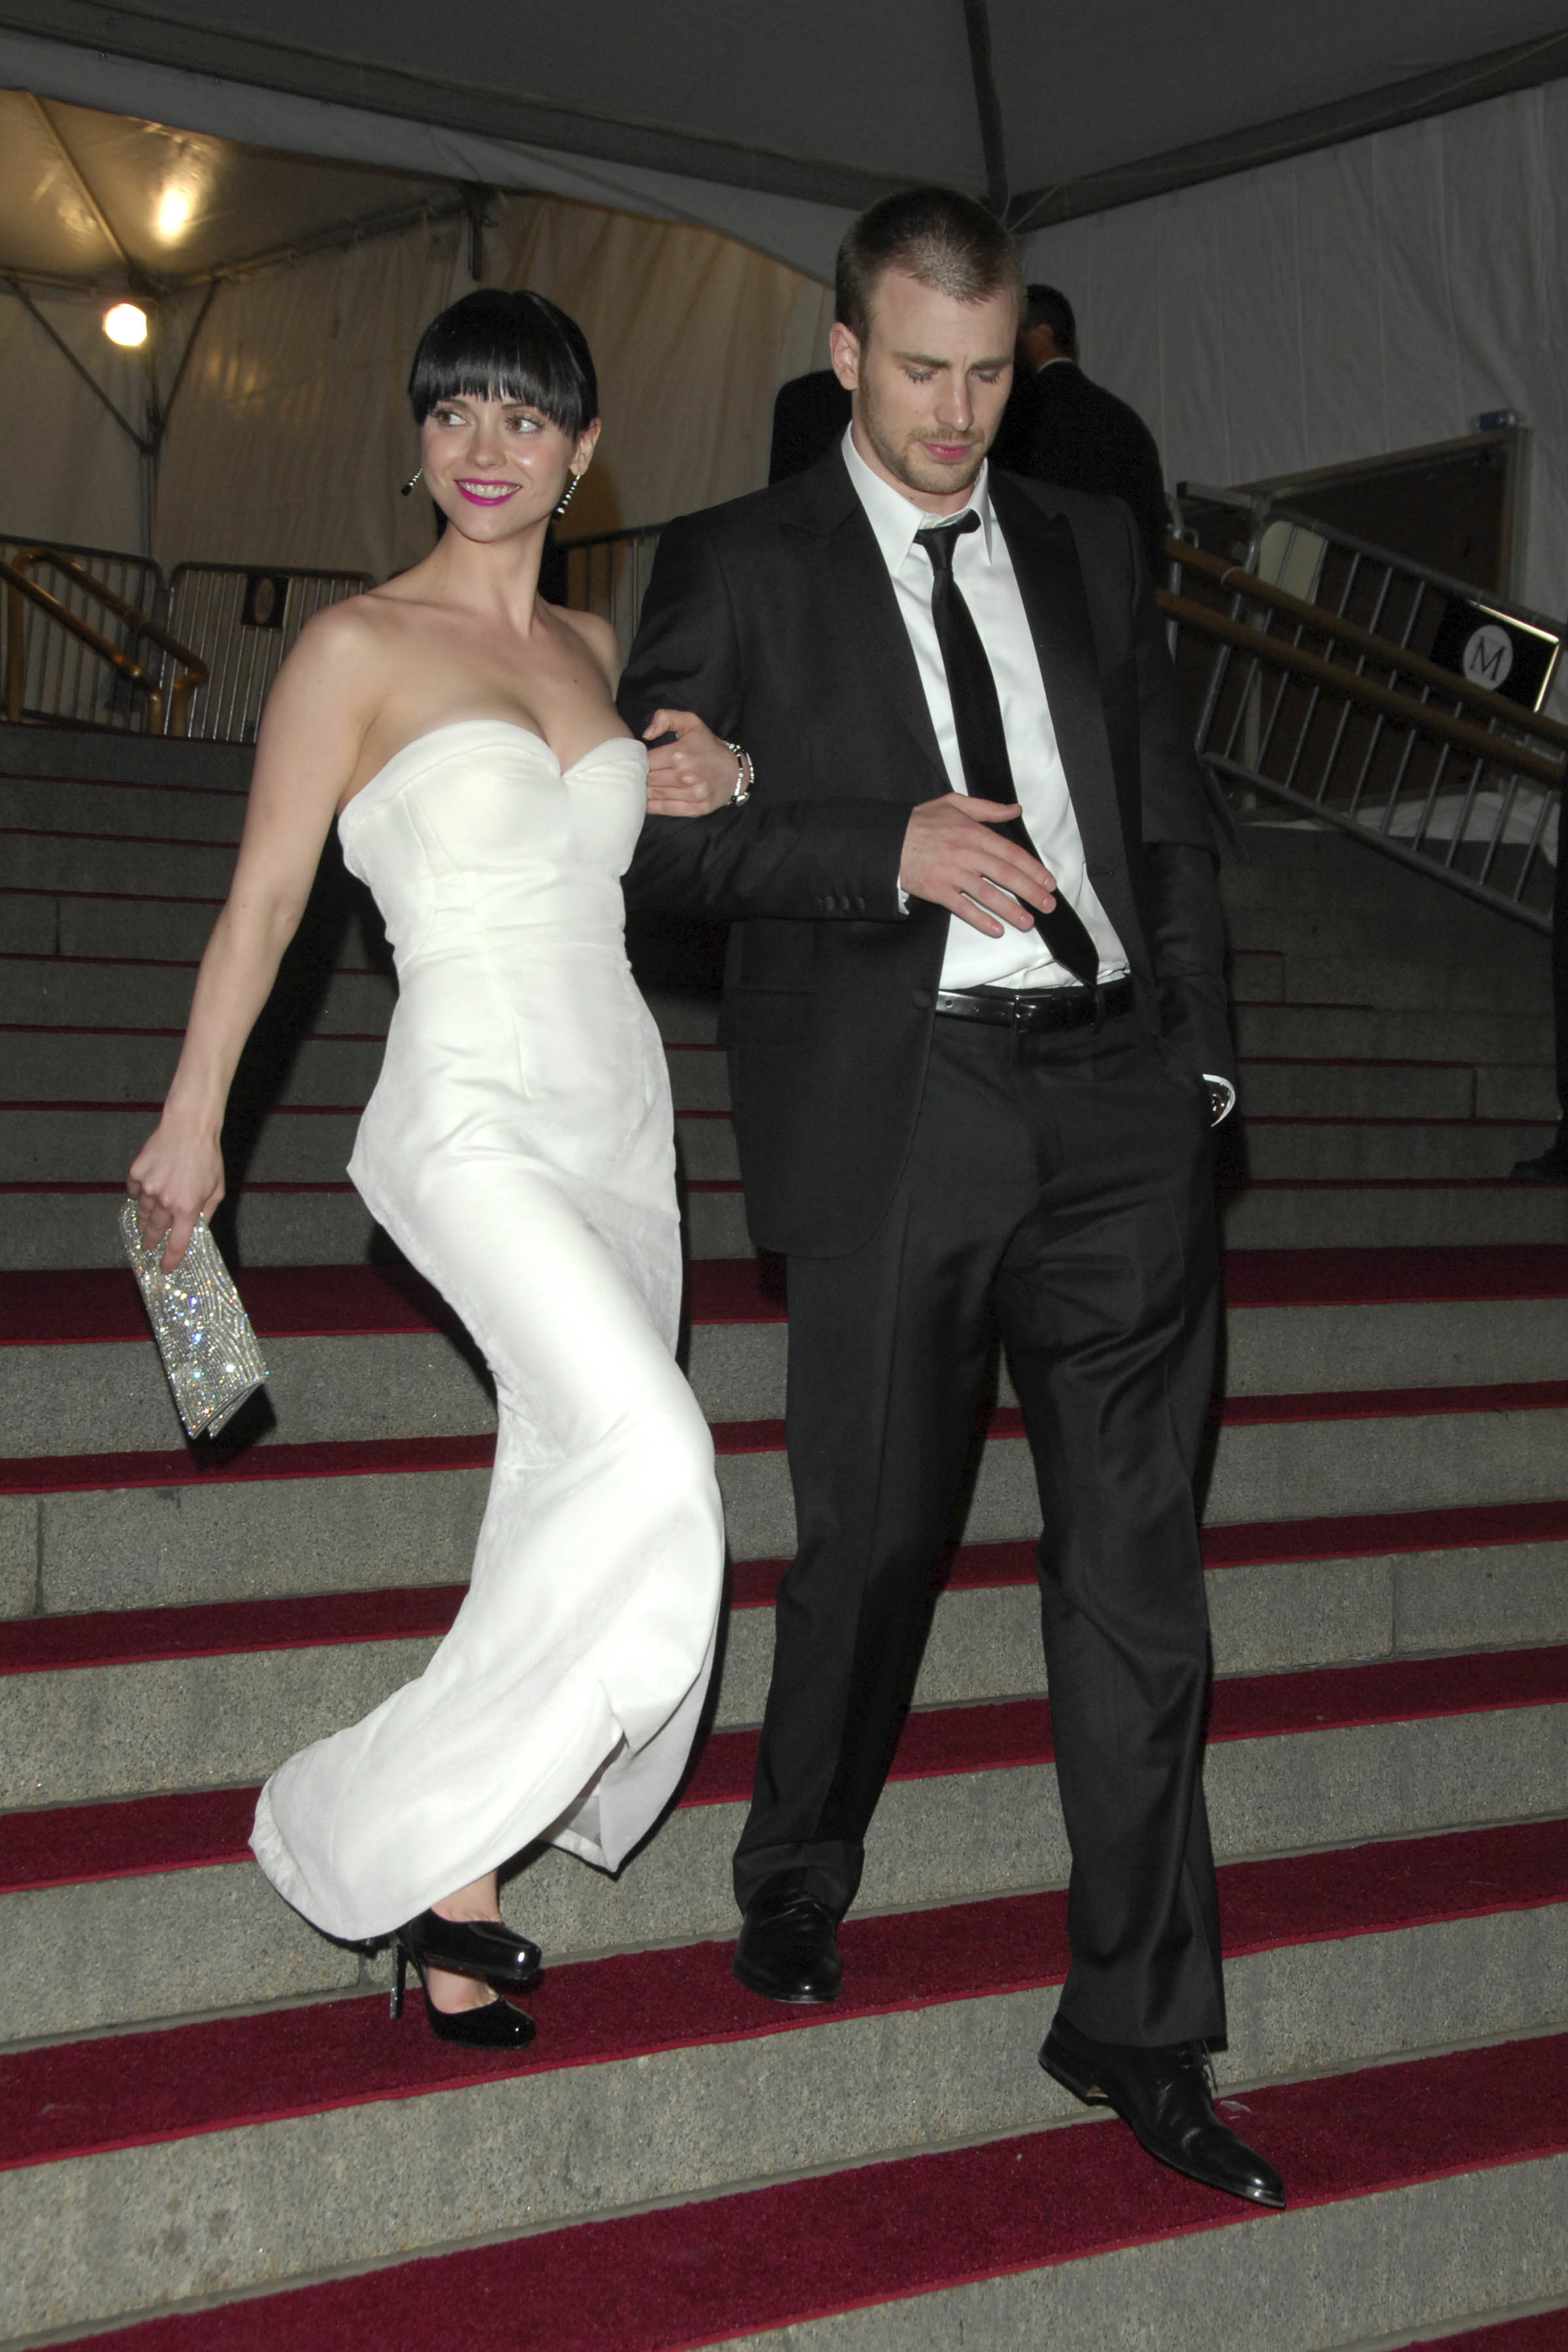 Christina smiling in a strapless white gown and Chris in a black suit and tie, walking on a staircase